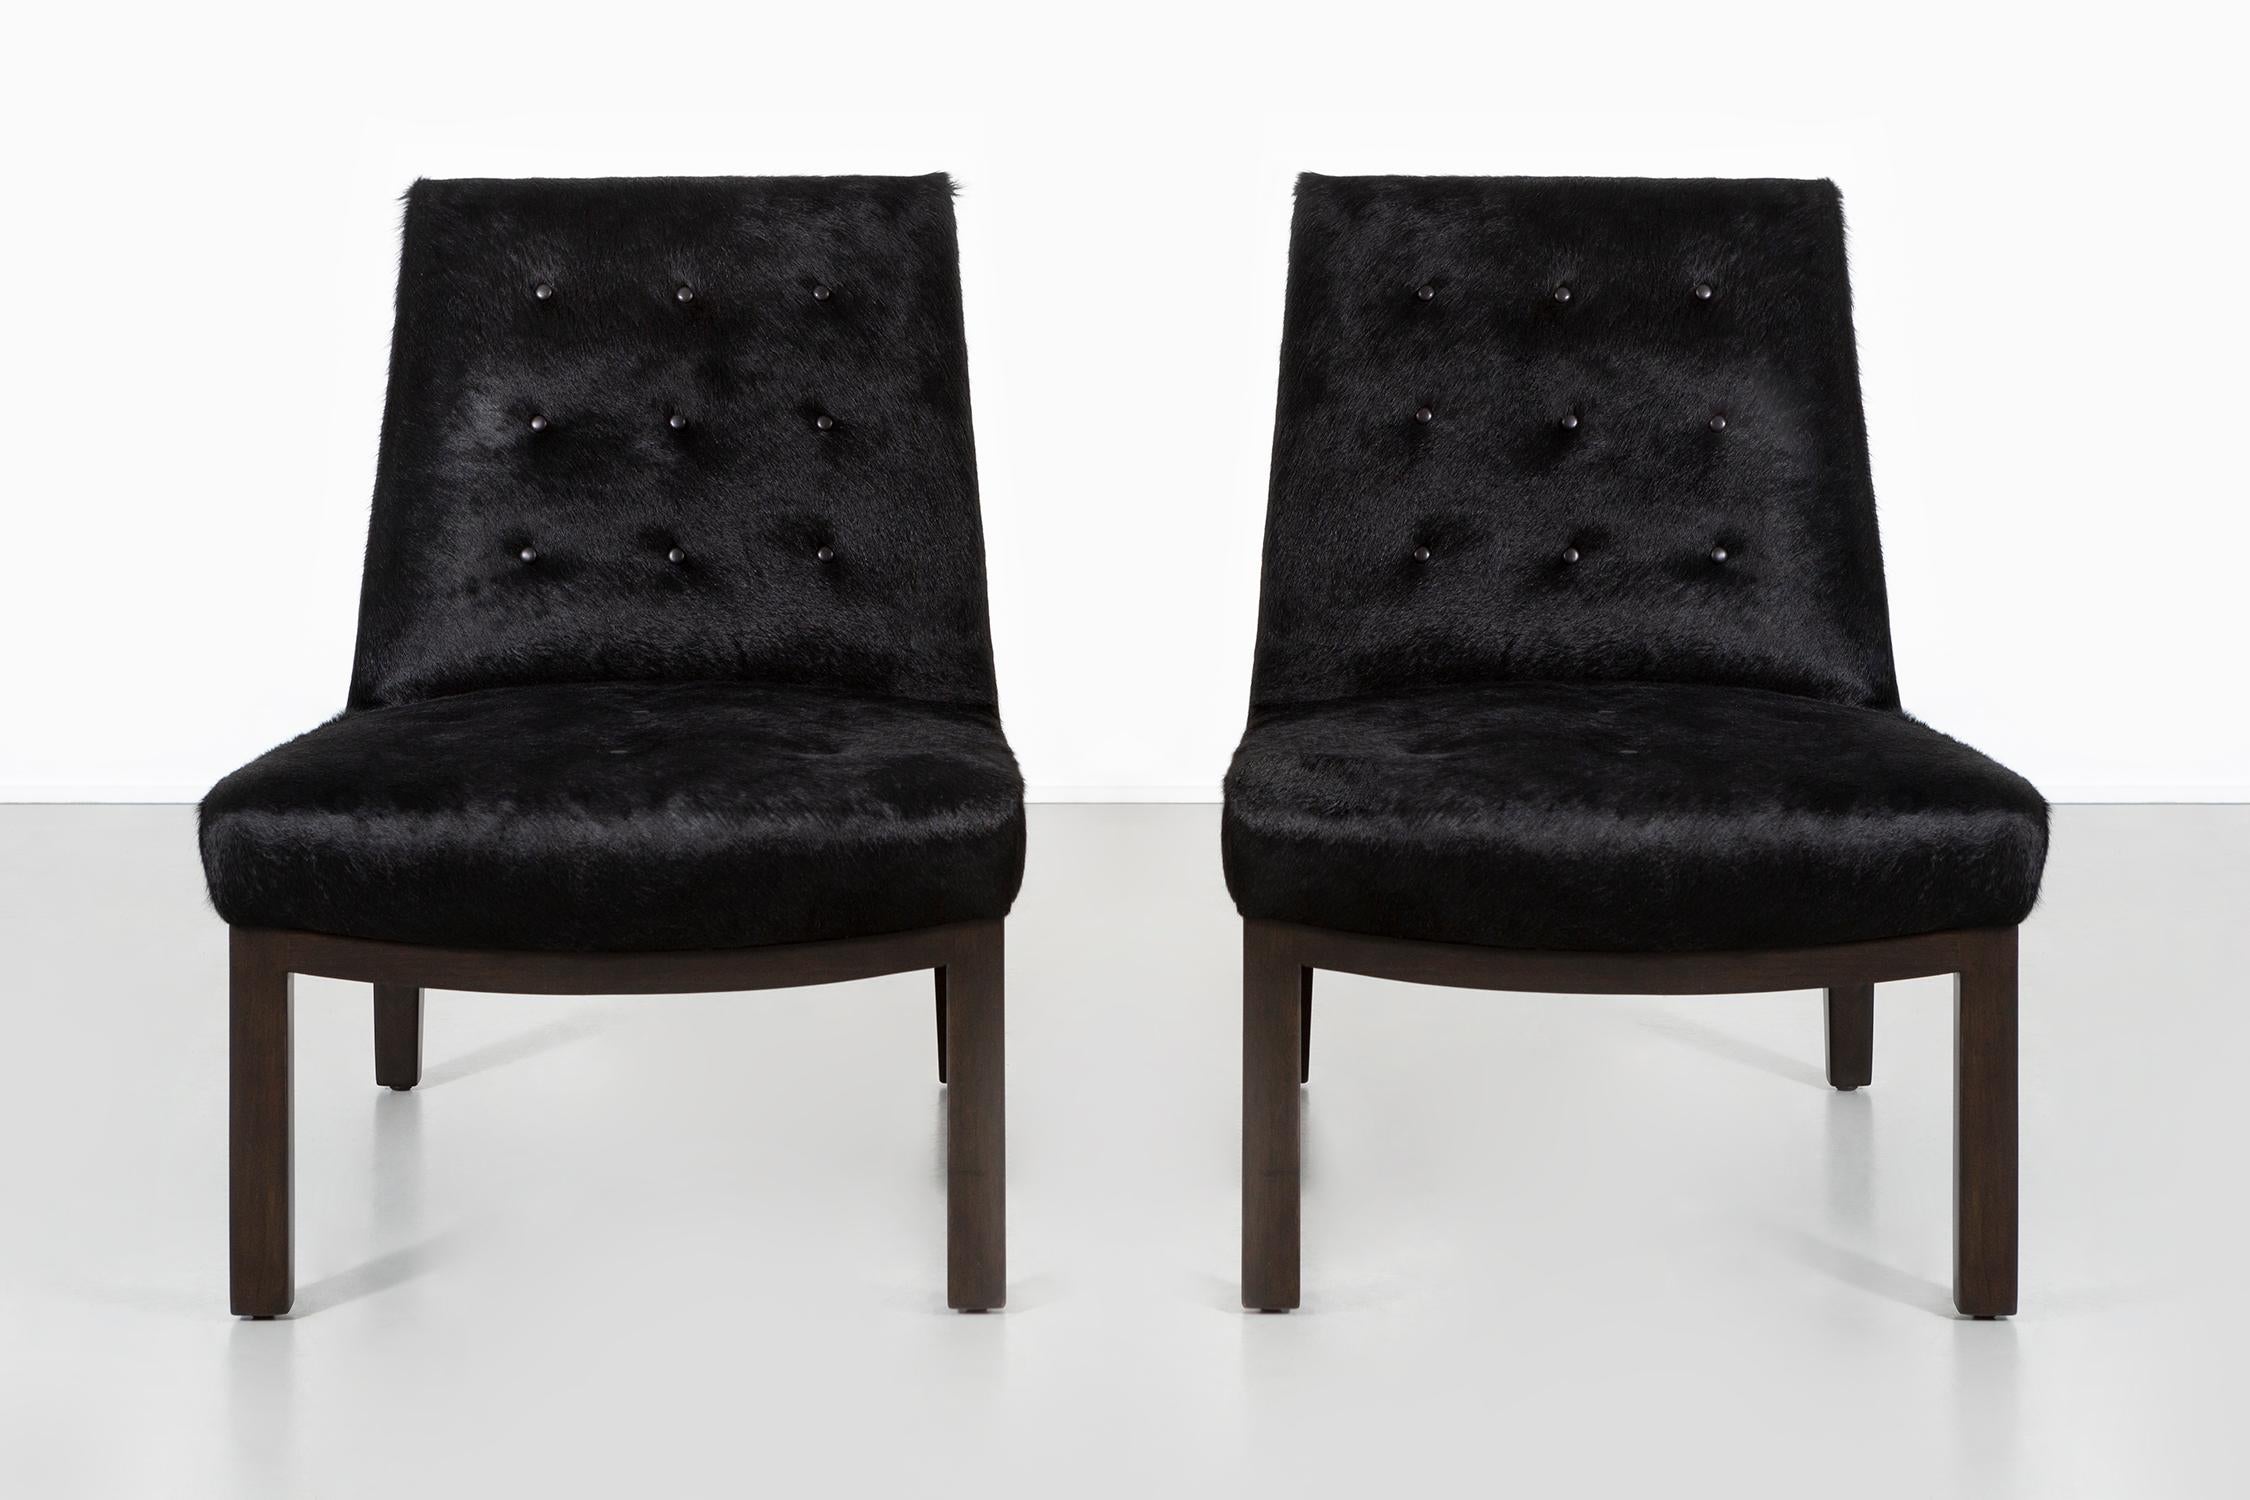 set of two slipper chairs

designed by Edward Wormley for Dunbar

USA, c 1950s

ebonized walnut + freshly reupholstered in Brazilian cowhide

32” h x 24” w x 28 ½” d x seat 15” h

sold as a set

fabric sample available upon